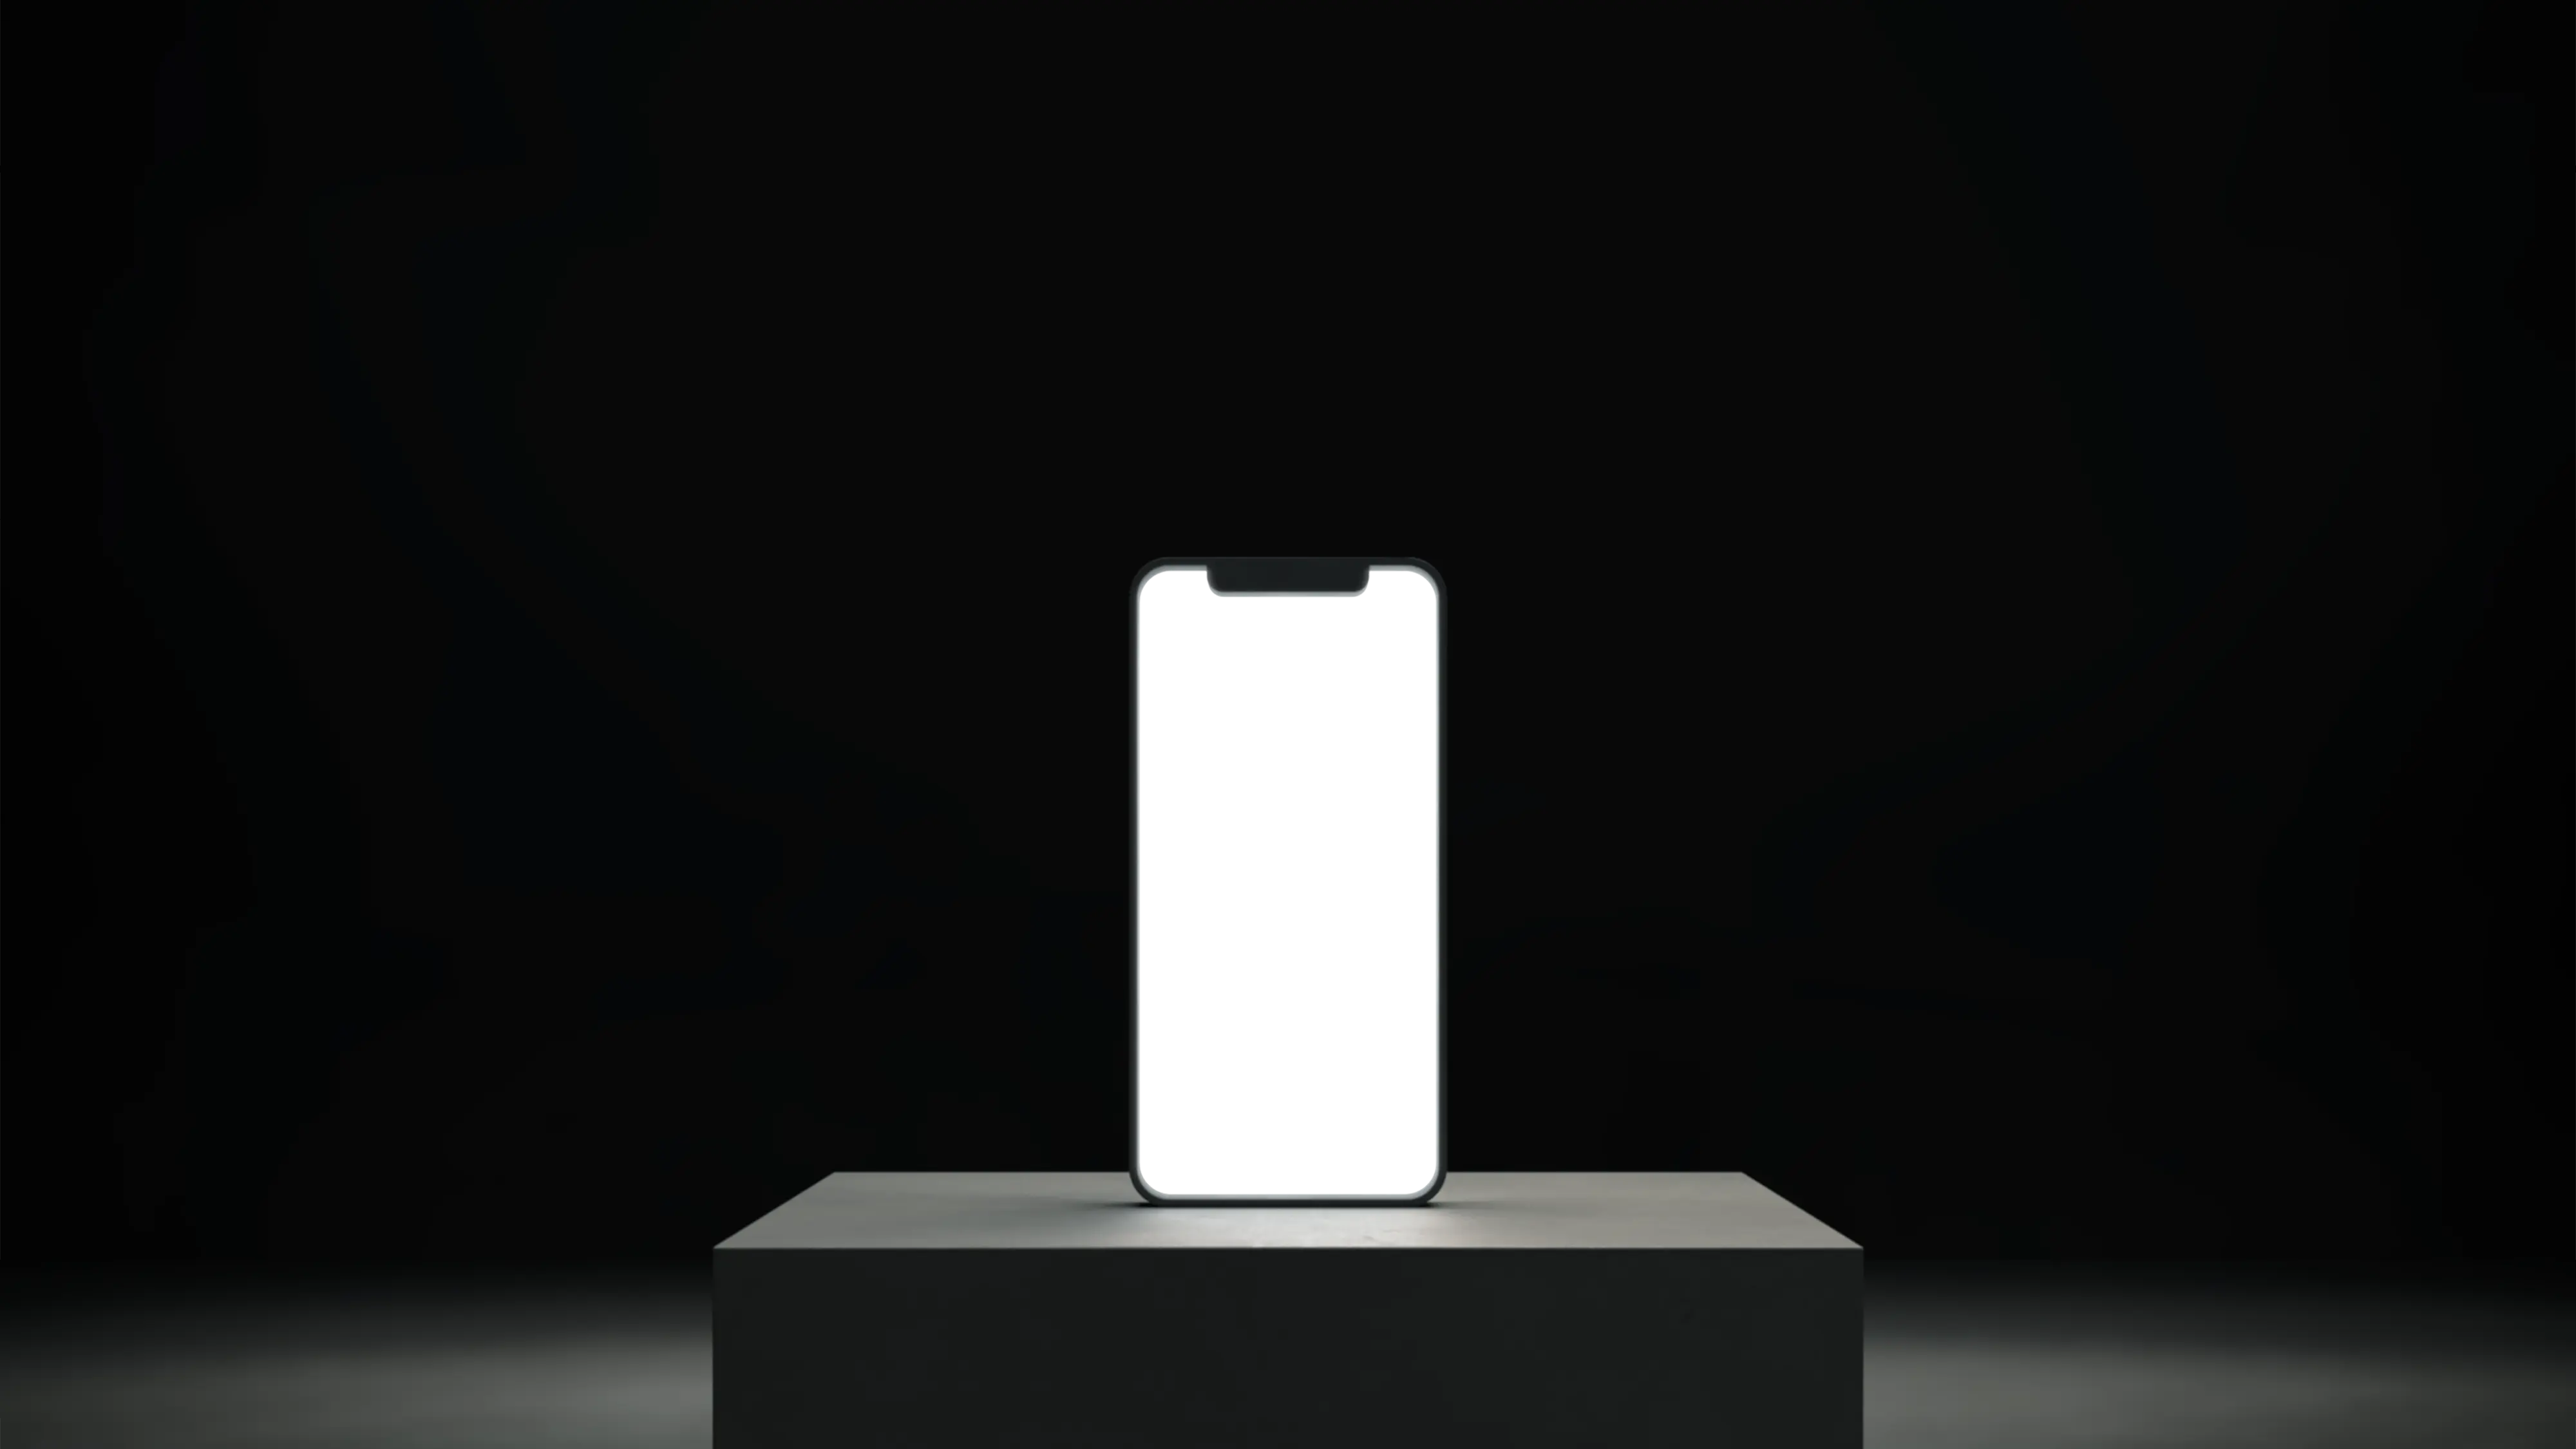 Smartphone on pedestal with lit empty white screen.